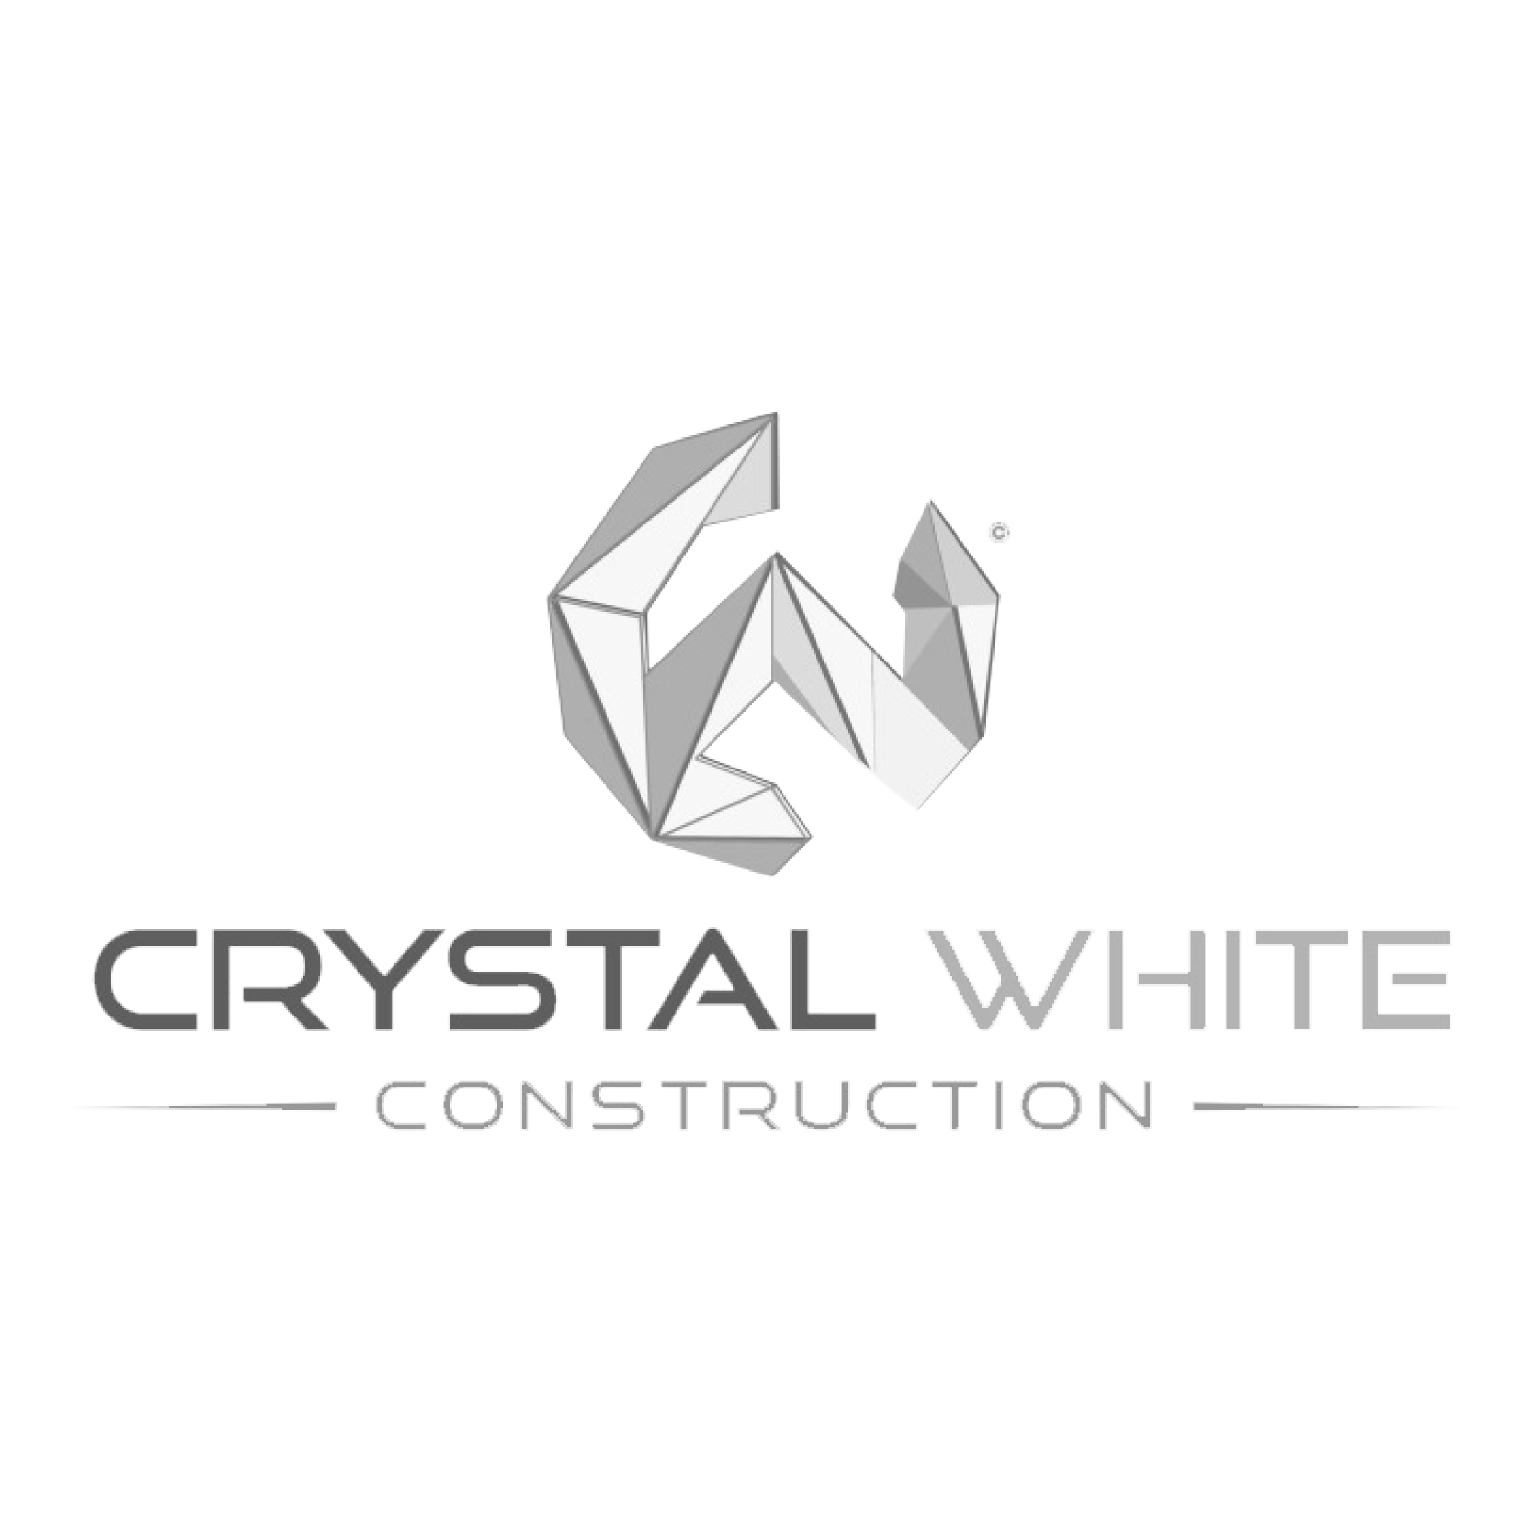 Crystal White Construction Limited